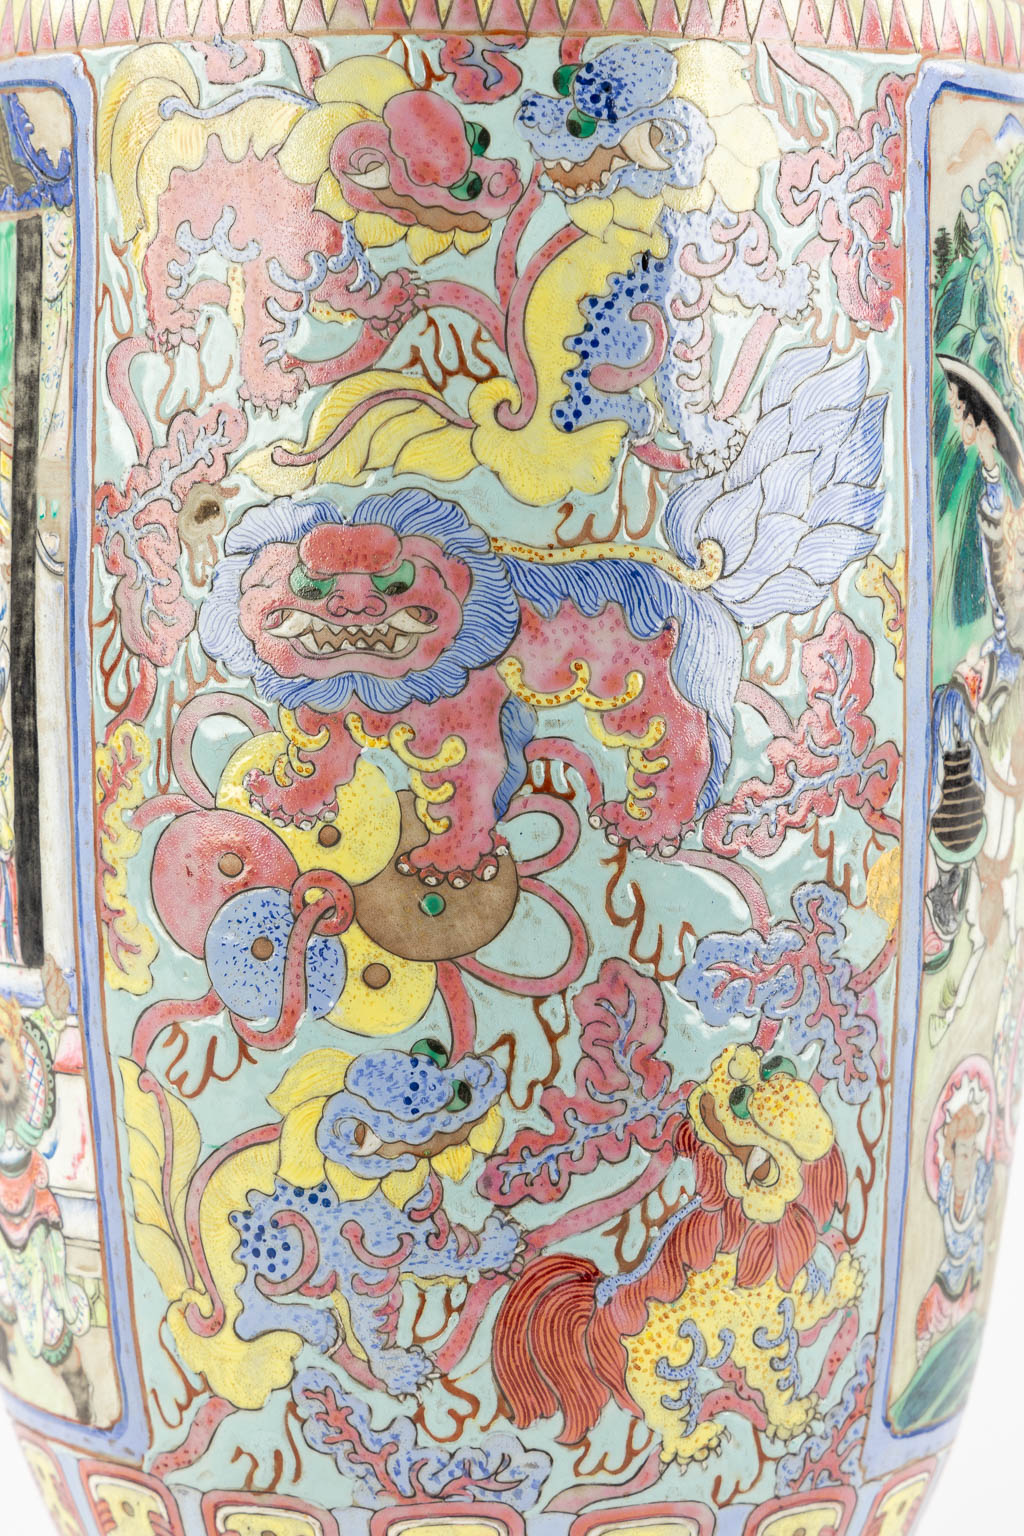 A Chinese vase, Famille Rose decorated with warriors. (H:58 x D:24 cm)